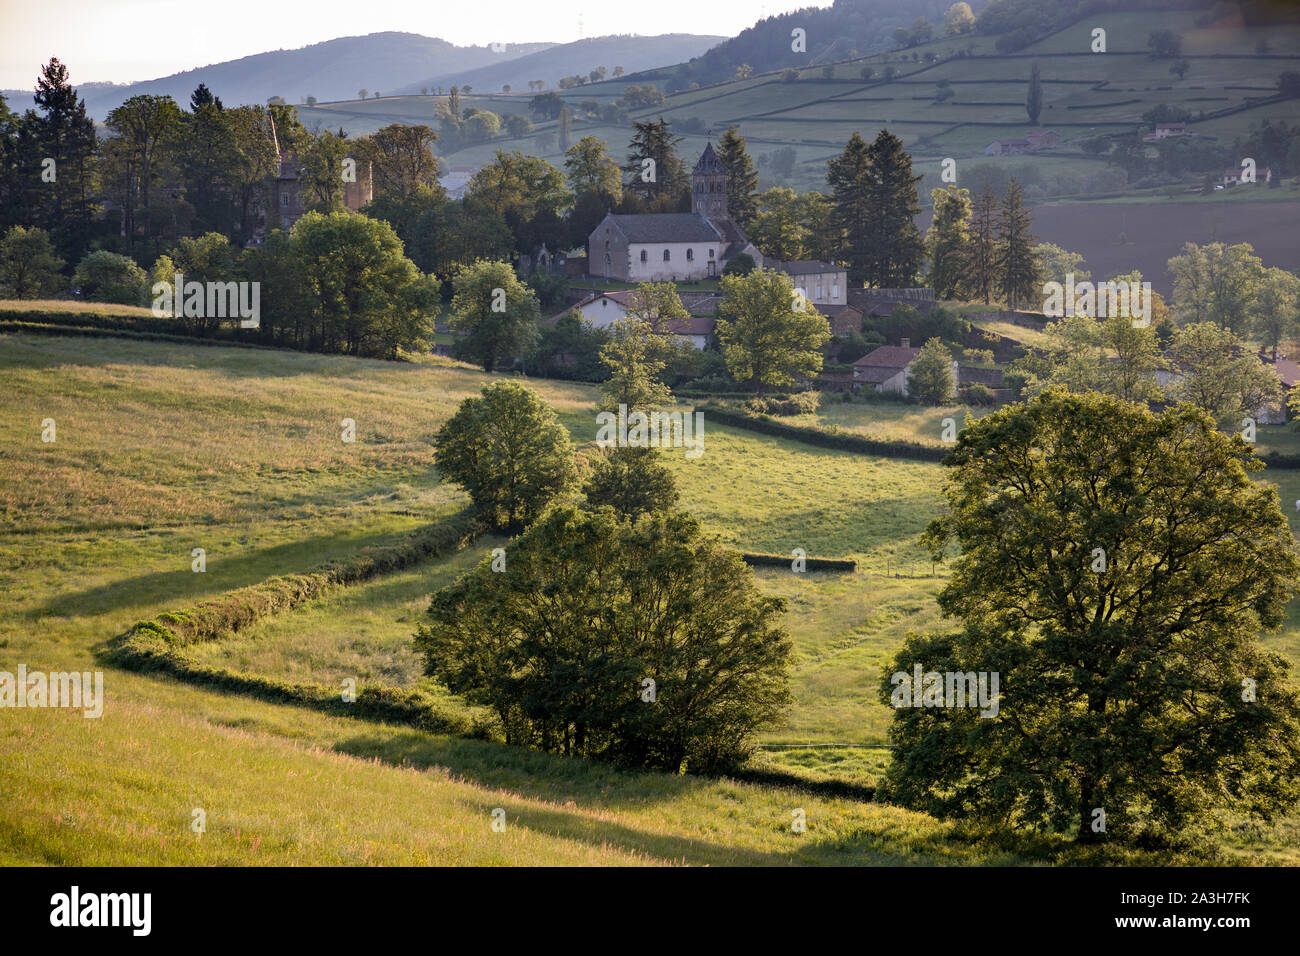 First light on the countryside around Chateau de Lamartine, Saint Point, Bourgogne, France Stock Photo